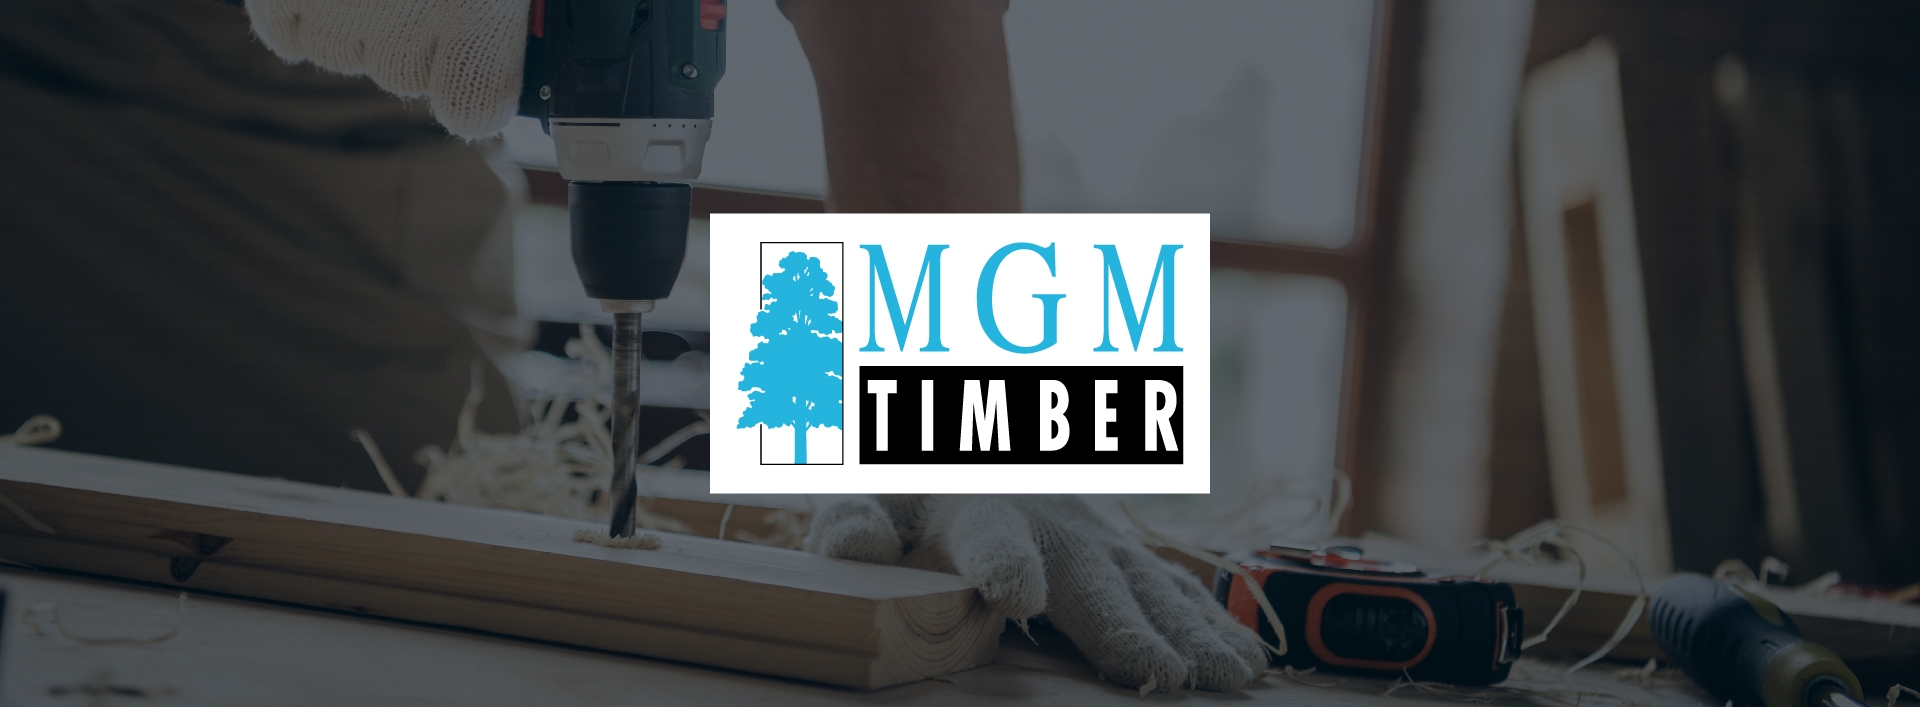 MGM Timber logo in front of a woodworking image